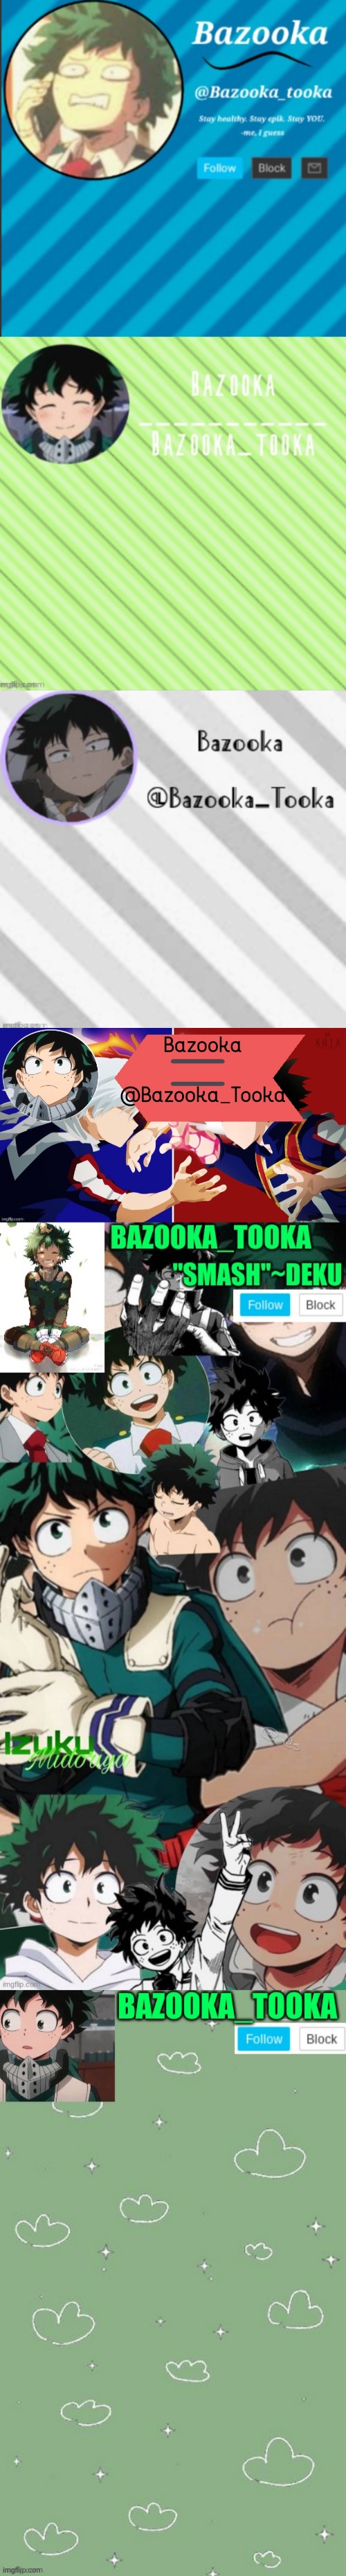 image tagged in bazooka's announcement template 2,bazooka's announcement template 3,bazooka's borred deku announcement template | made w/ Imgflip meme maker